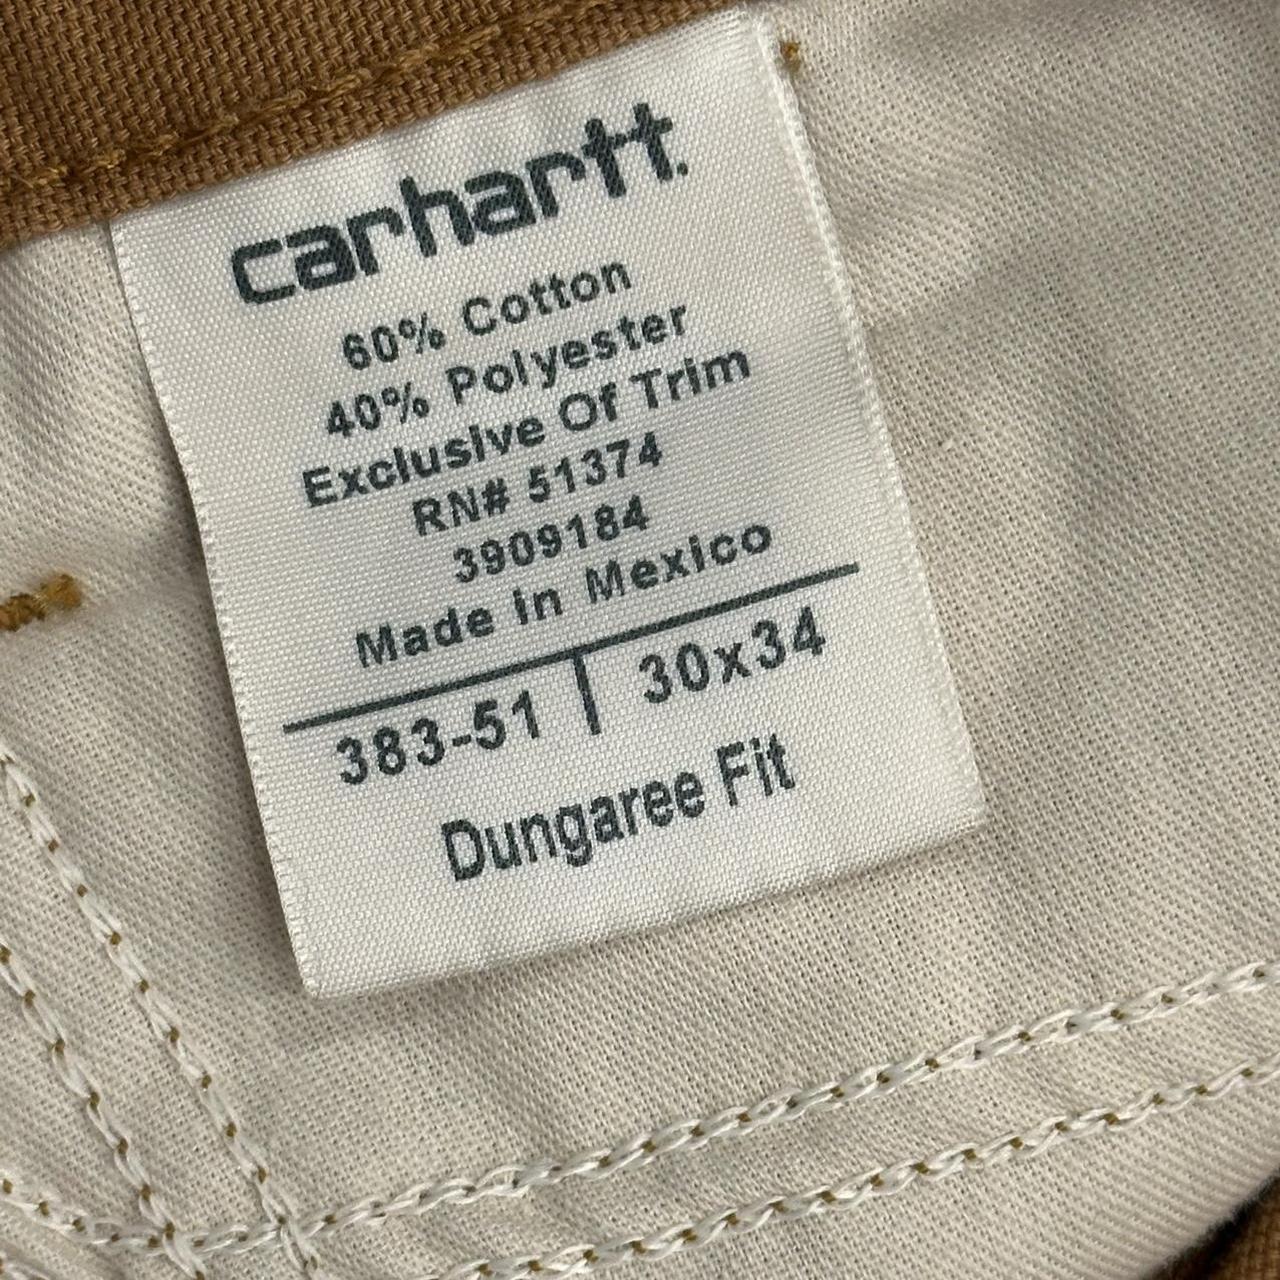 Carhartt Dungaree Fit pants Wear and distressing... - Depop